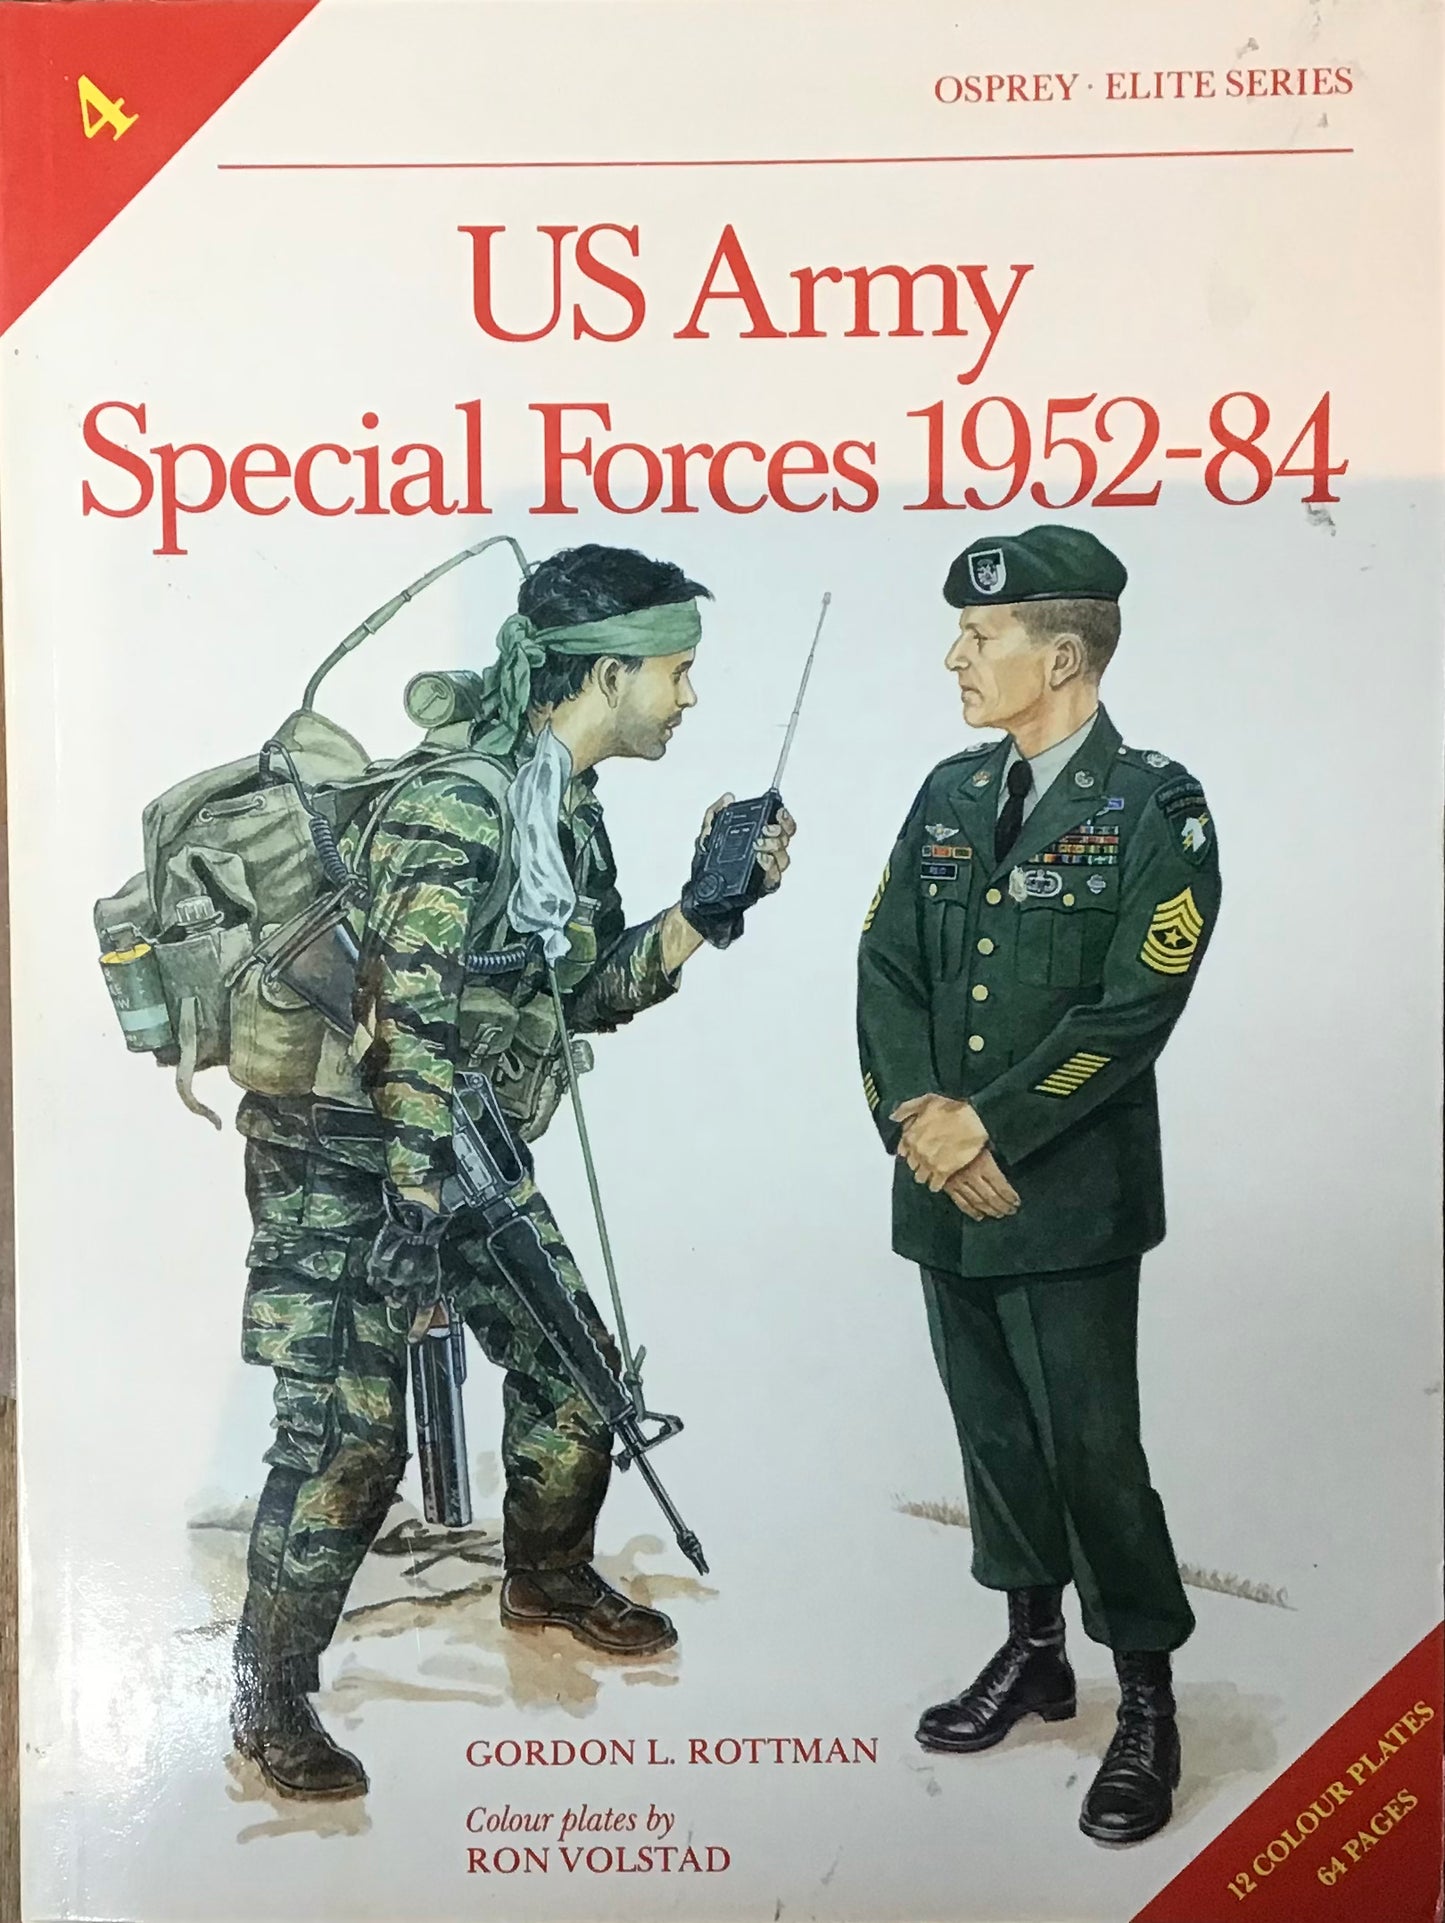 US Army Special Forces 1952-84 by Gordon L. Rottman and Ron Volstad - Chester Model Centre